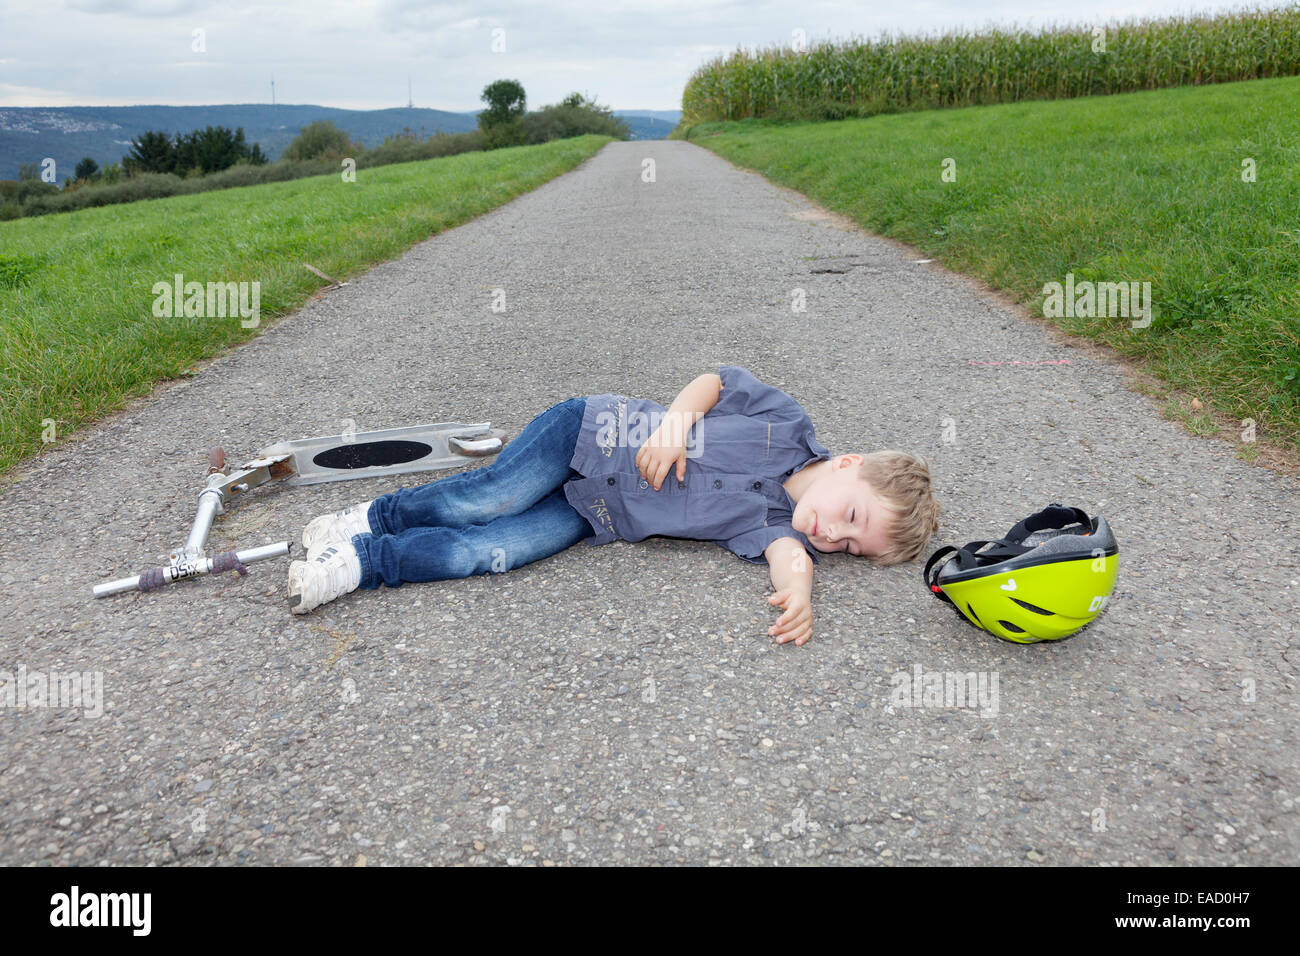 Boy, 5 years, lying on a road after a scooter accident Stock Photo